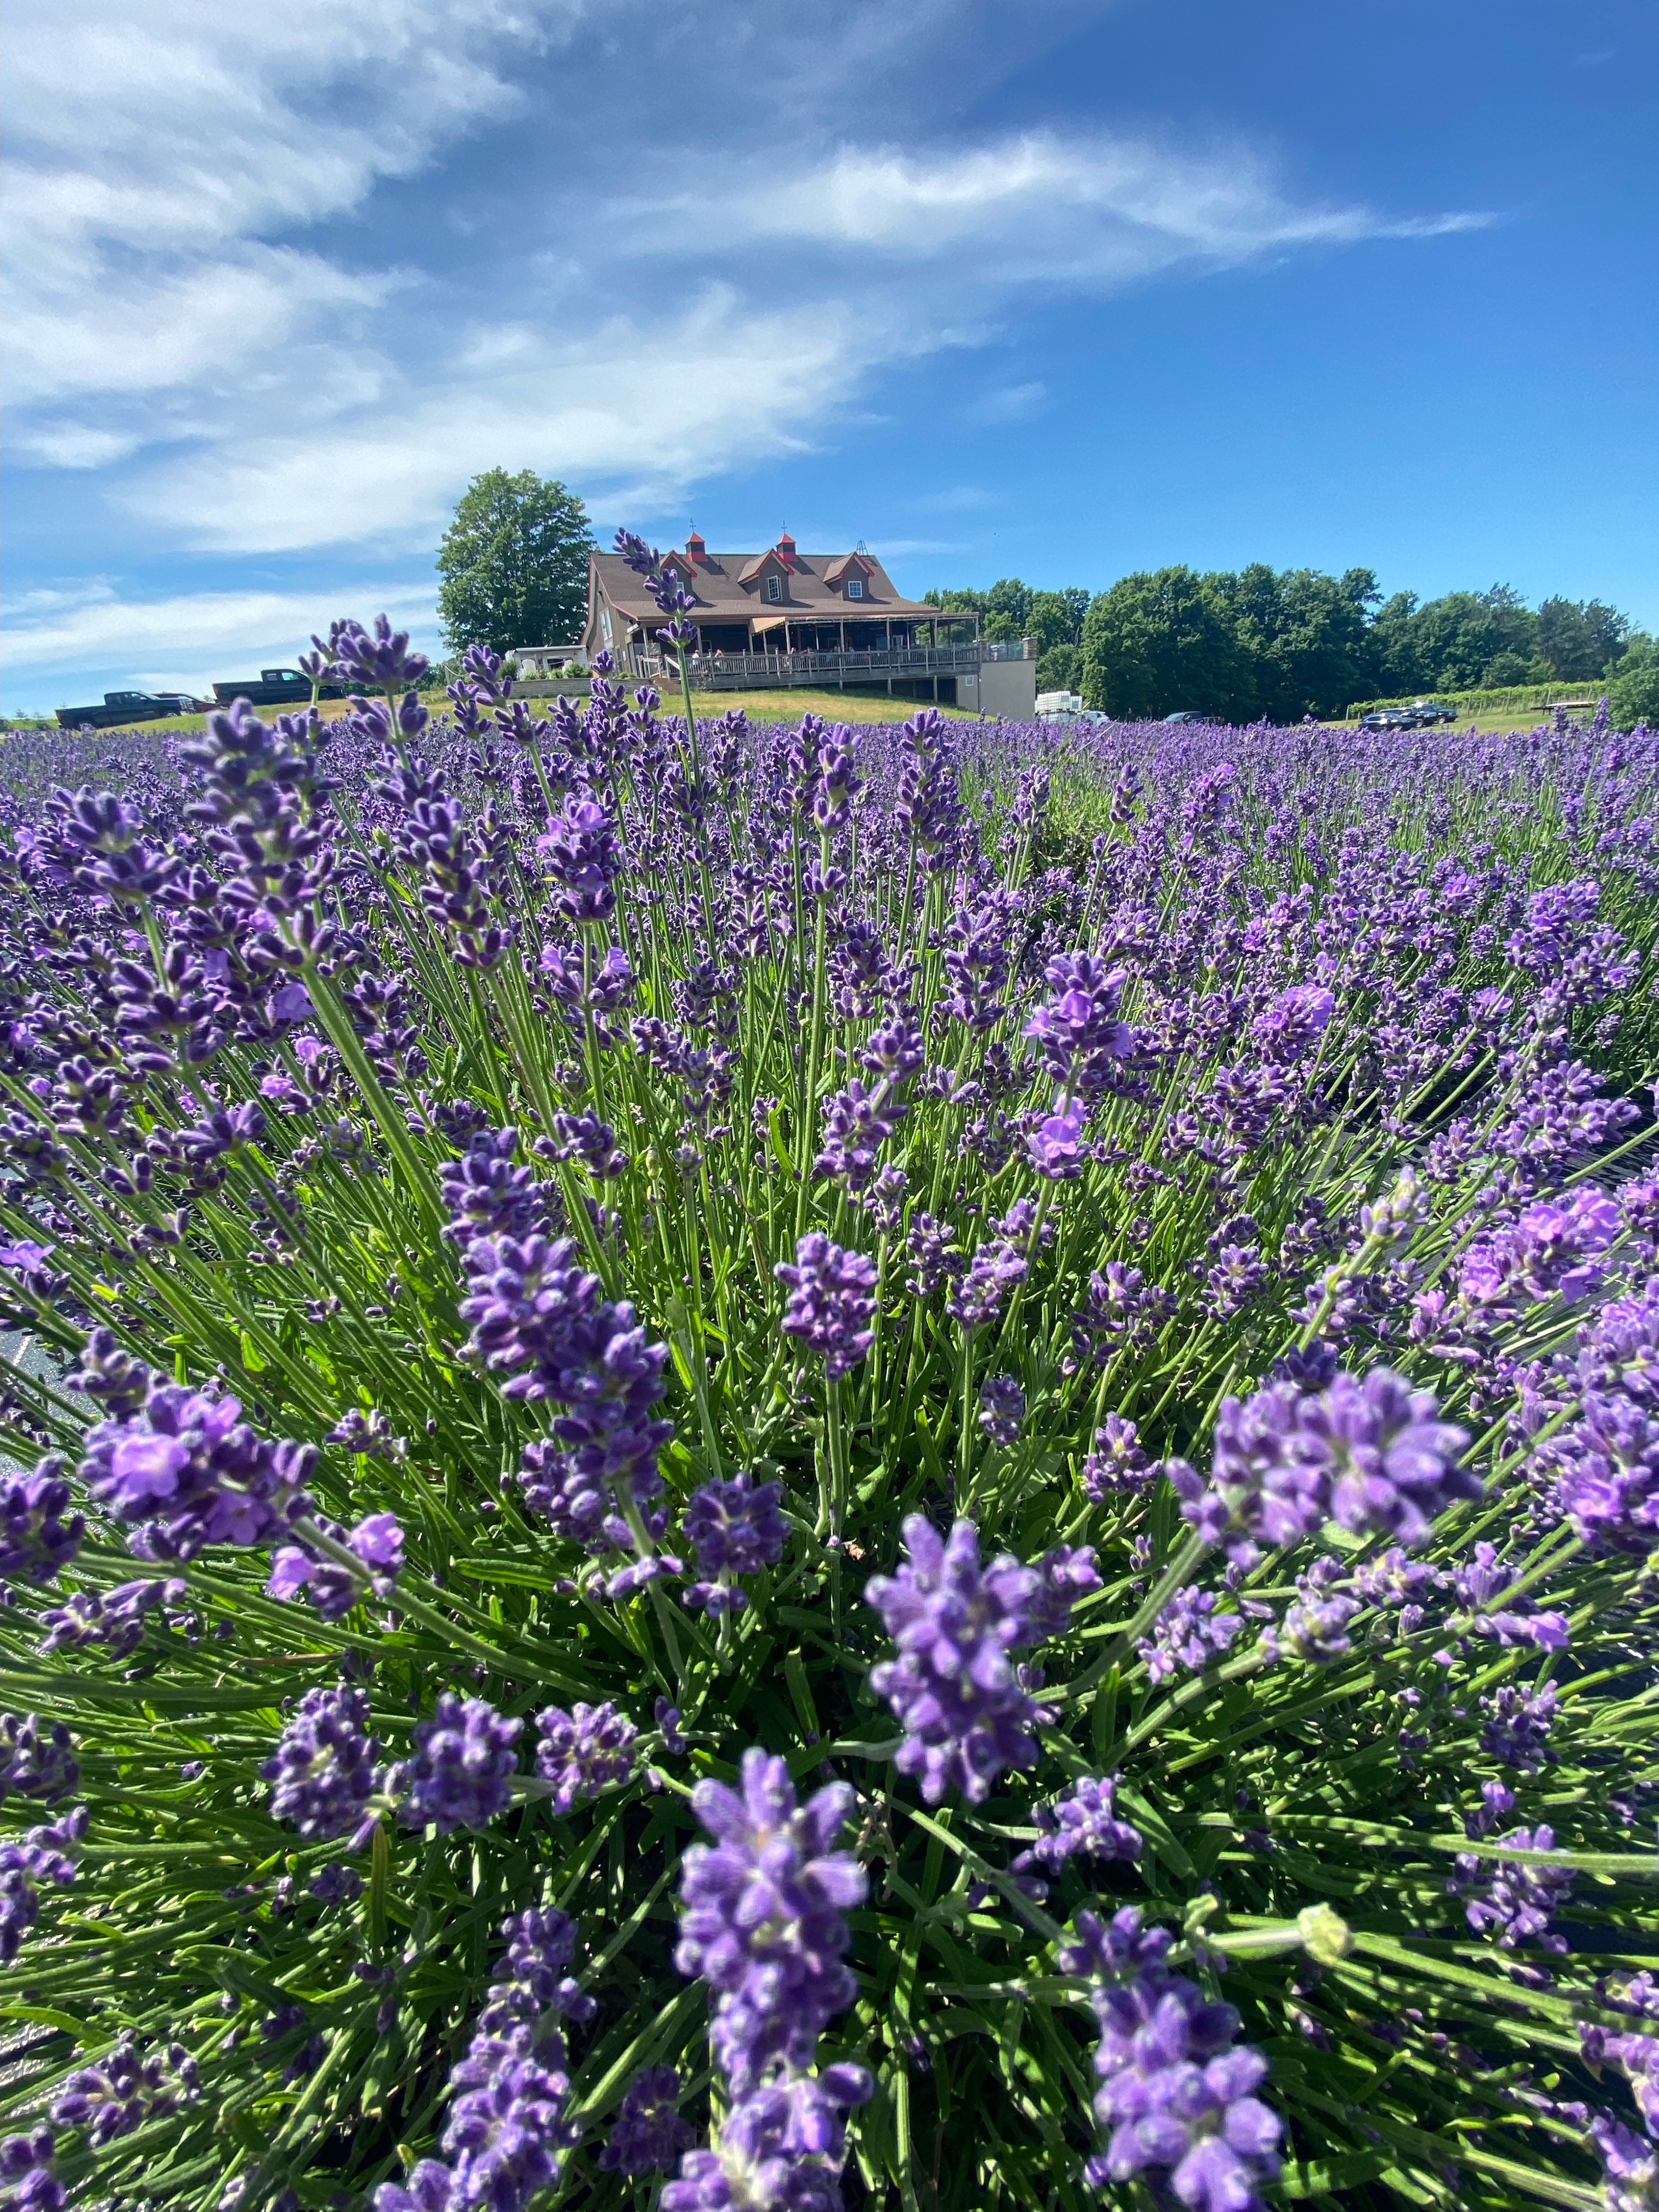 Our lavender field with the winery in the background.